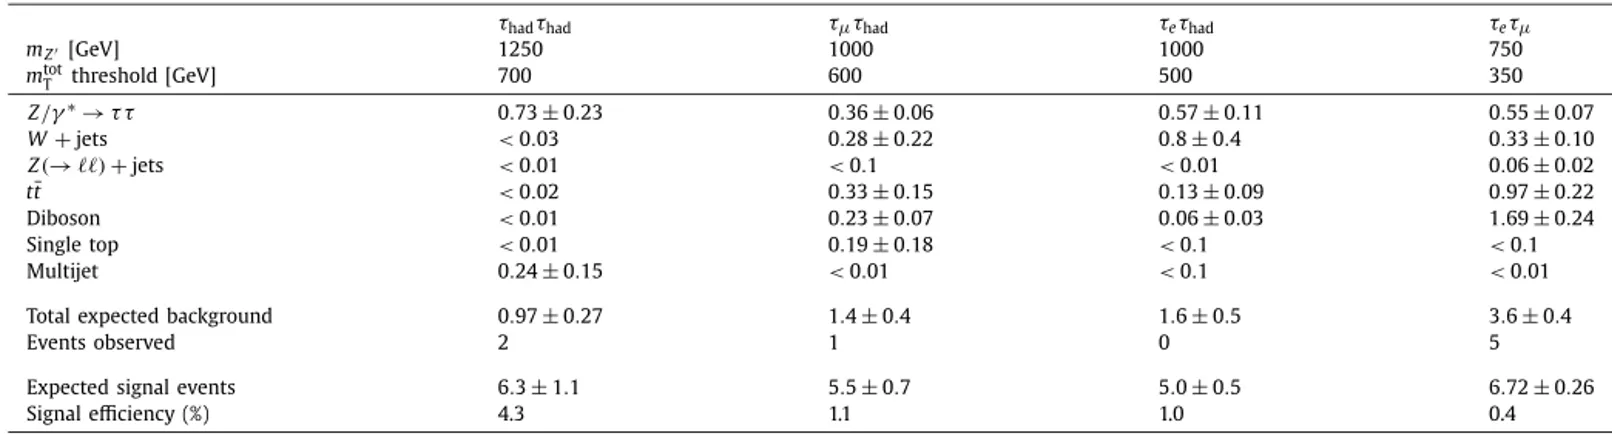 Table 2 summarises the uncertainties on the estimated sig- sig-nal and total background contributions in each channel